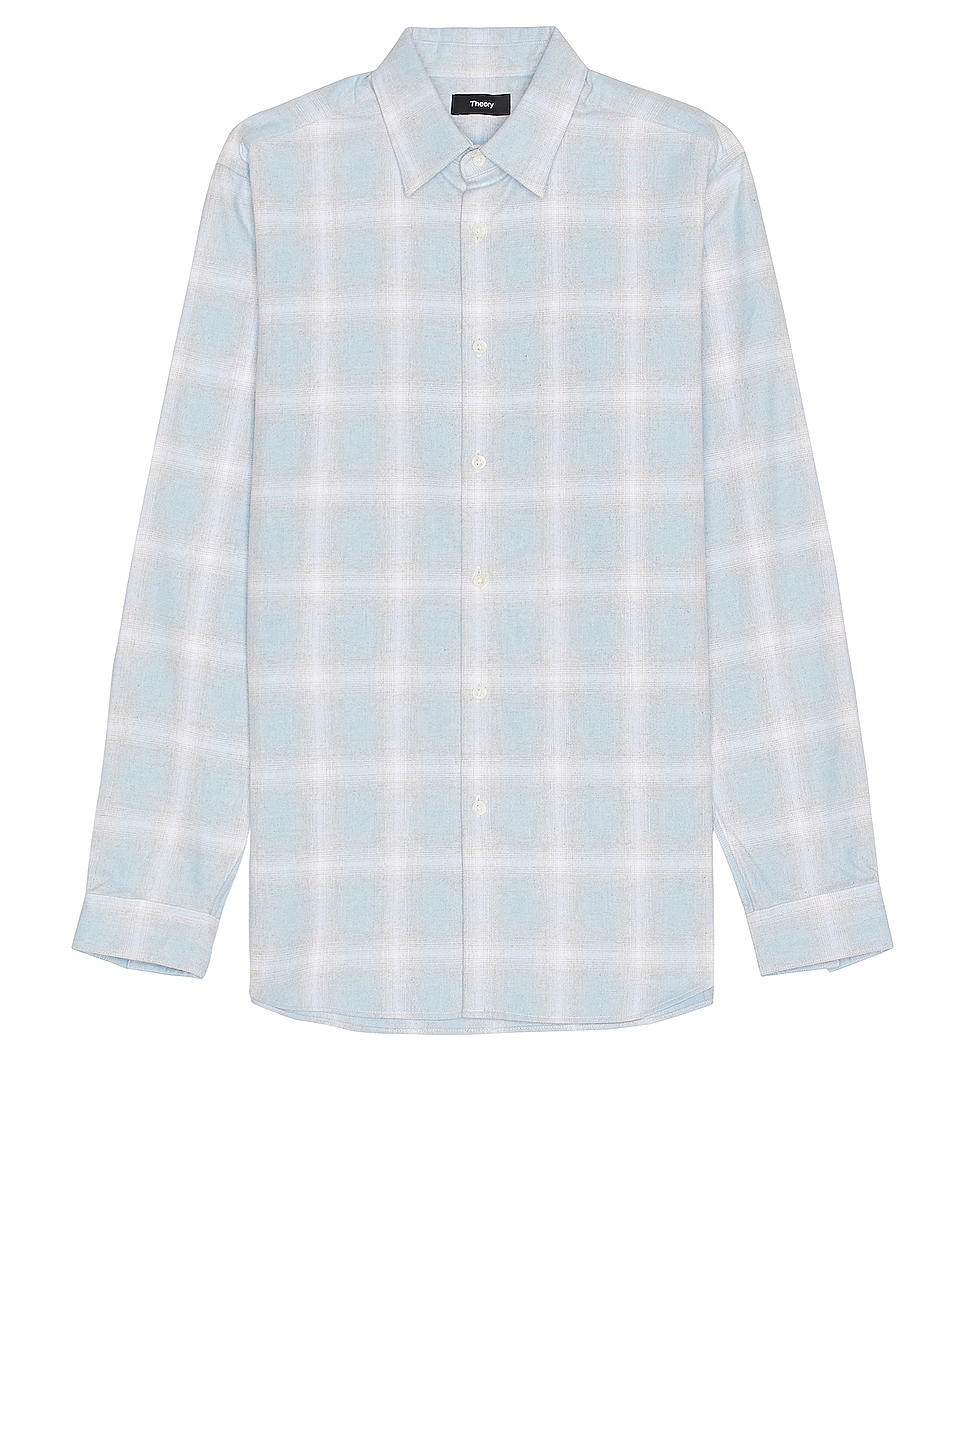 Image 1 of Theory Irving Flannel in Blue Multi